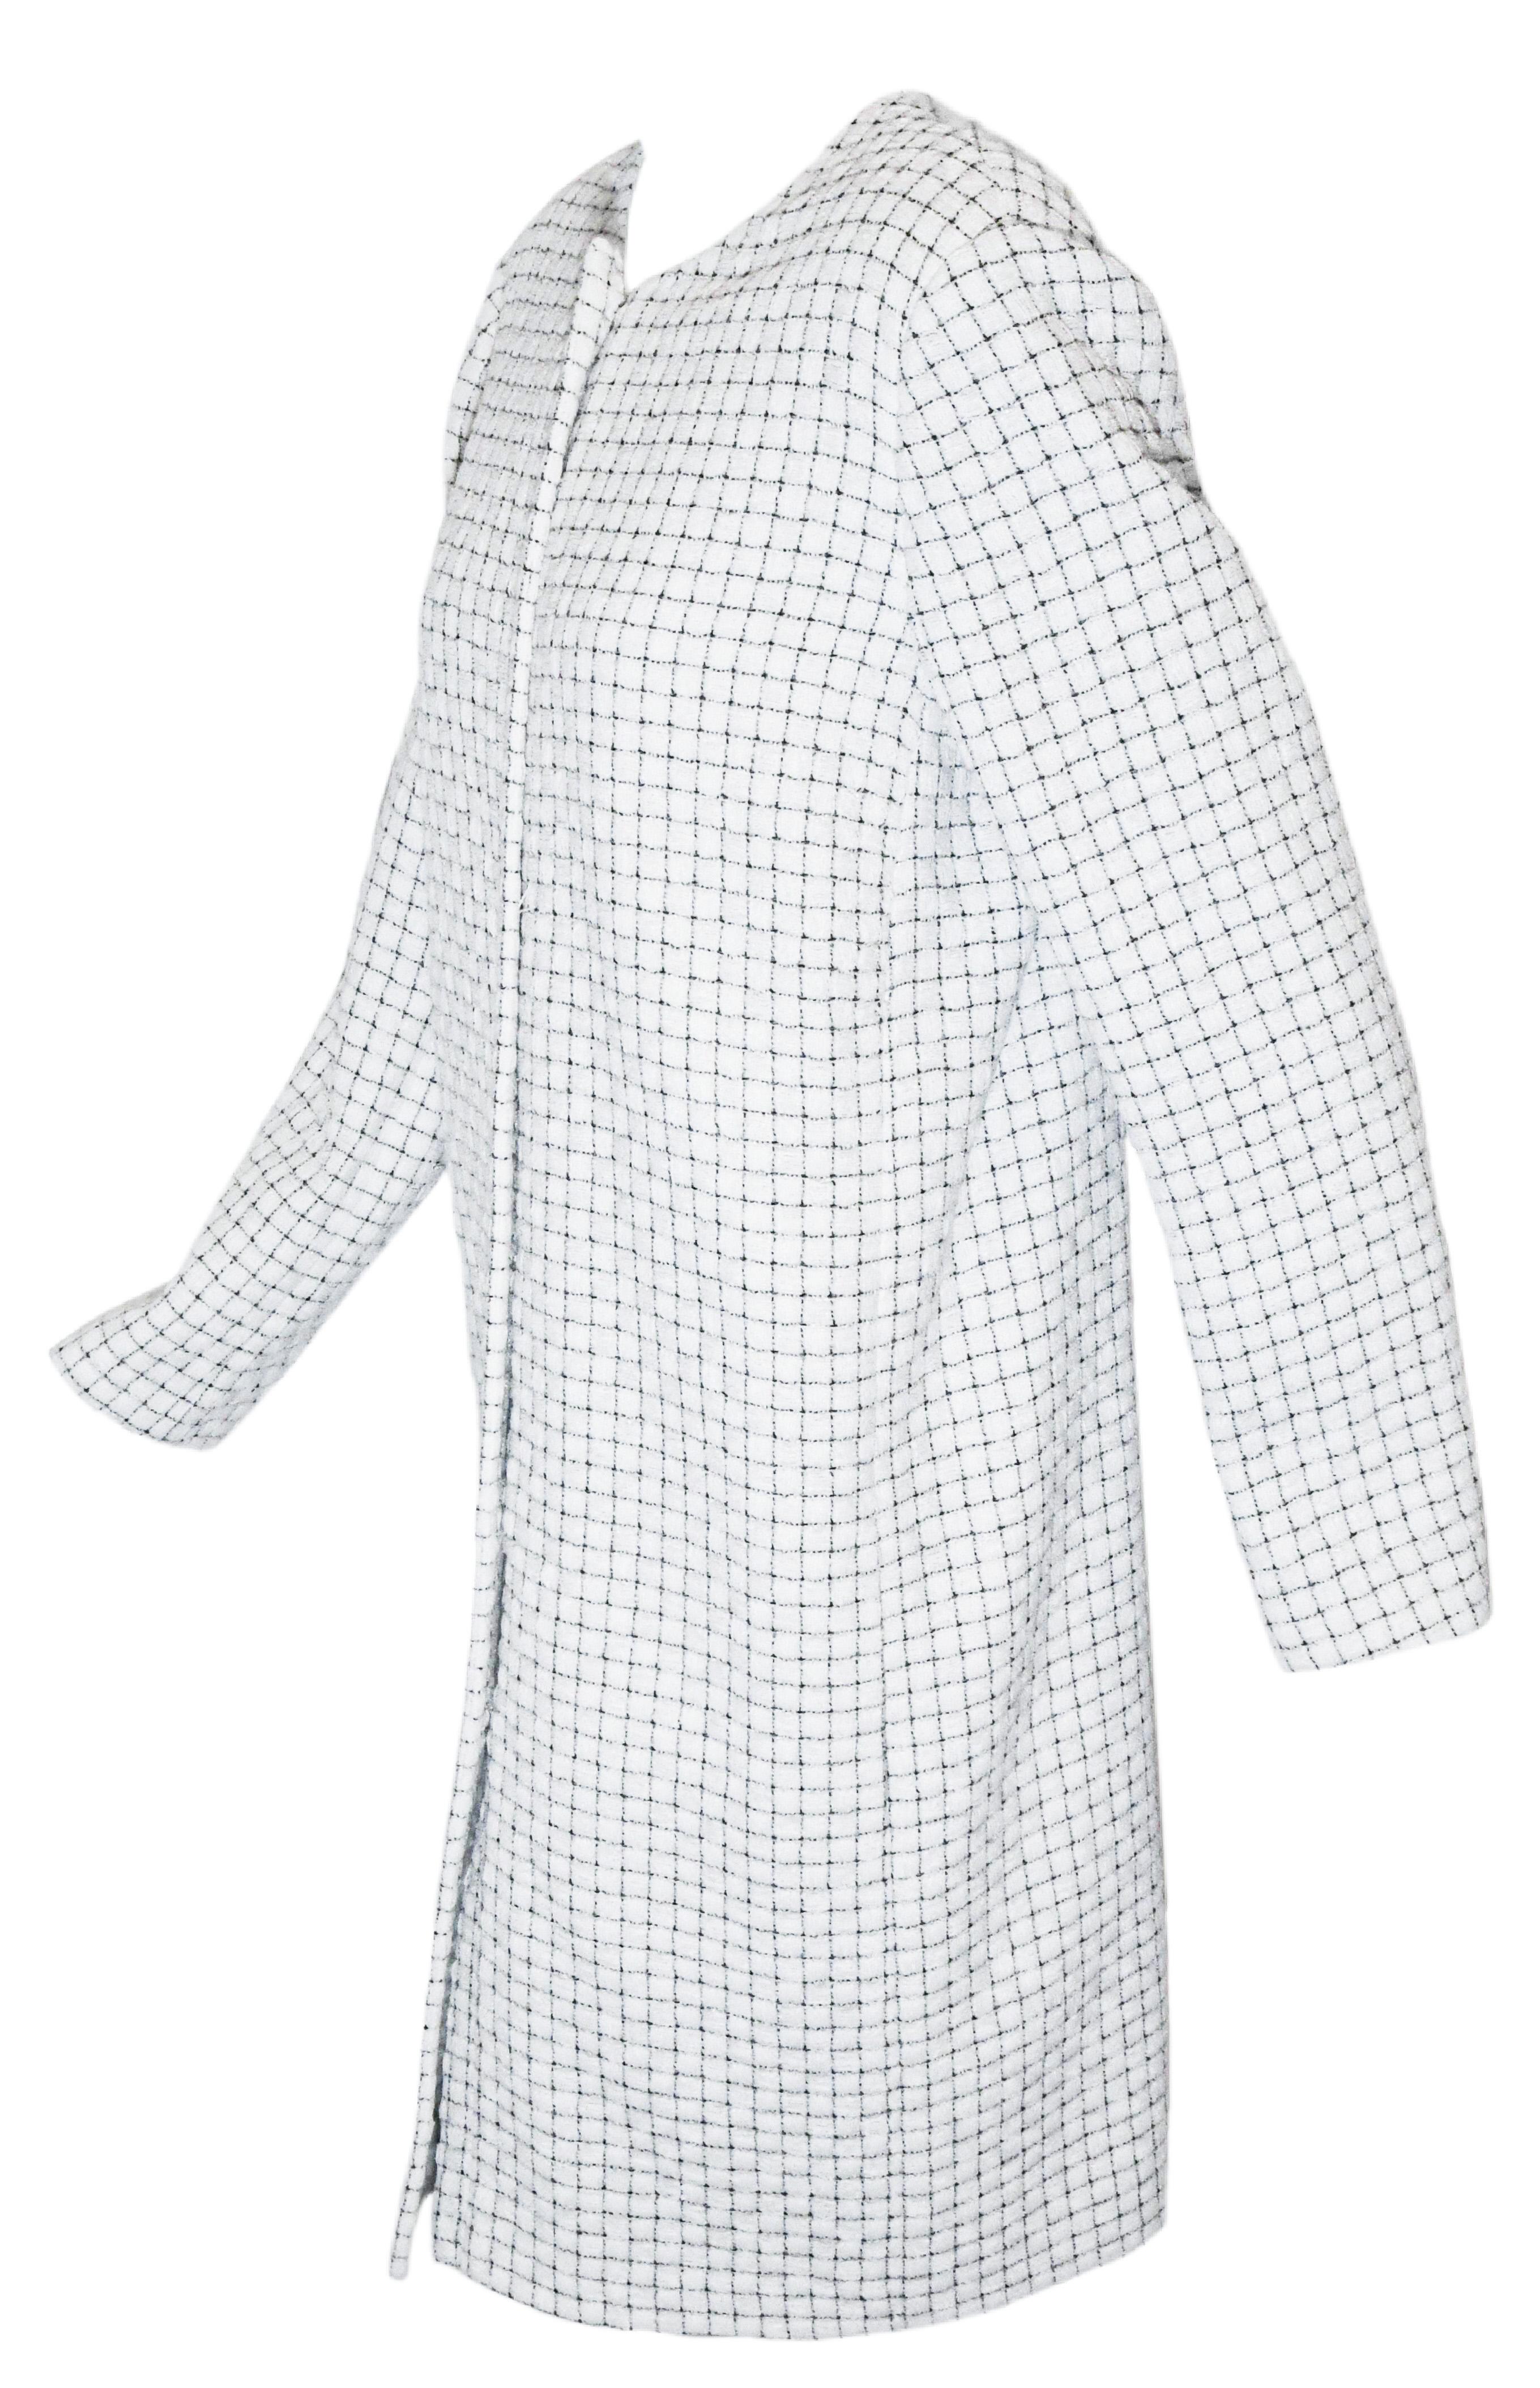 Chanel white and black check coat from the Spring 2016 Collection is a contemporary, modern long jacket/coat. This fantasy tweed white coat with black thin trim creating the check pattern allover the coat is in pristine condition.  It is lined in